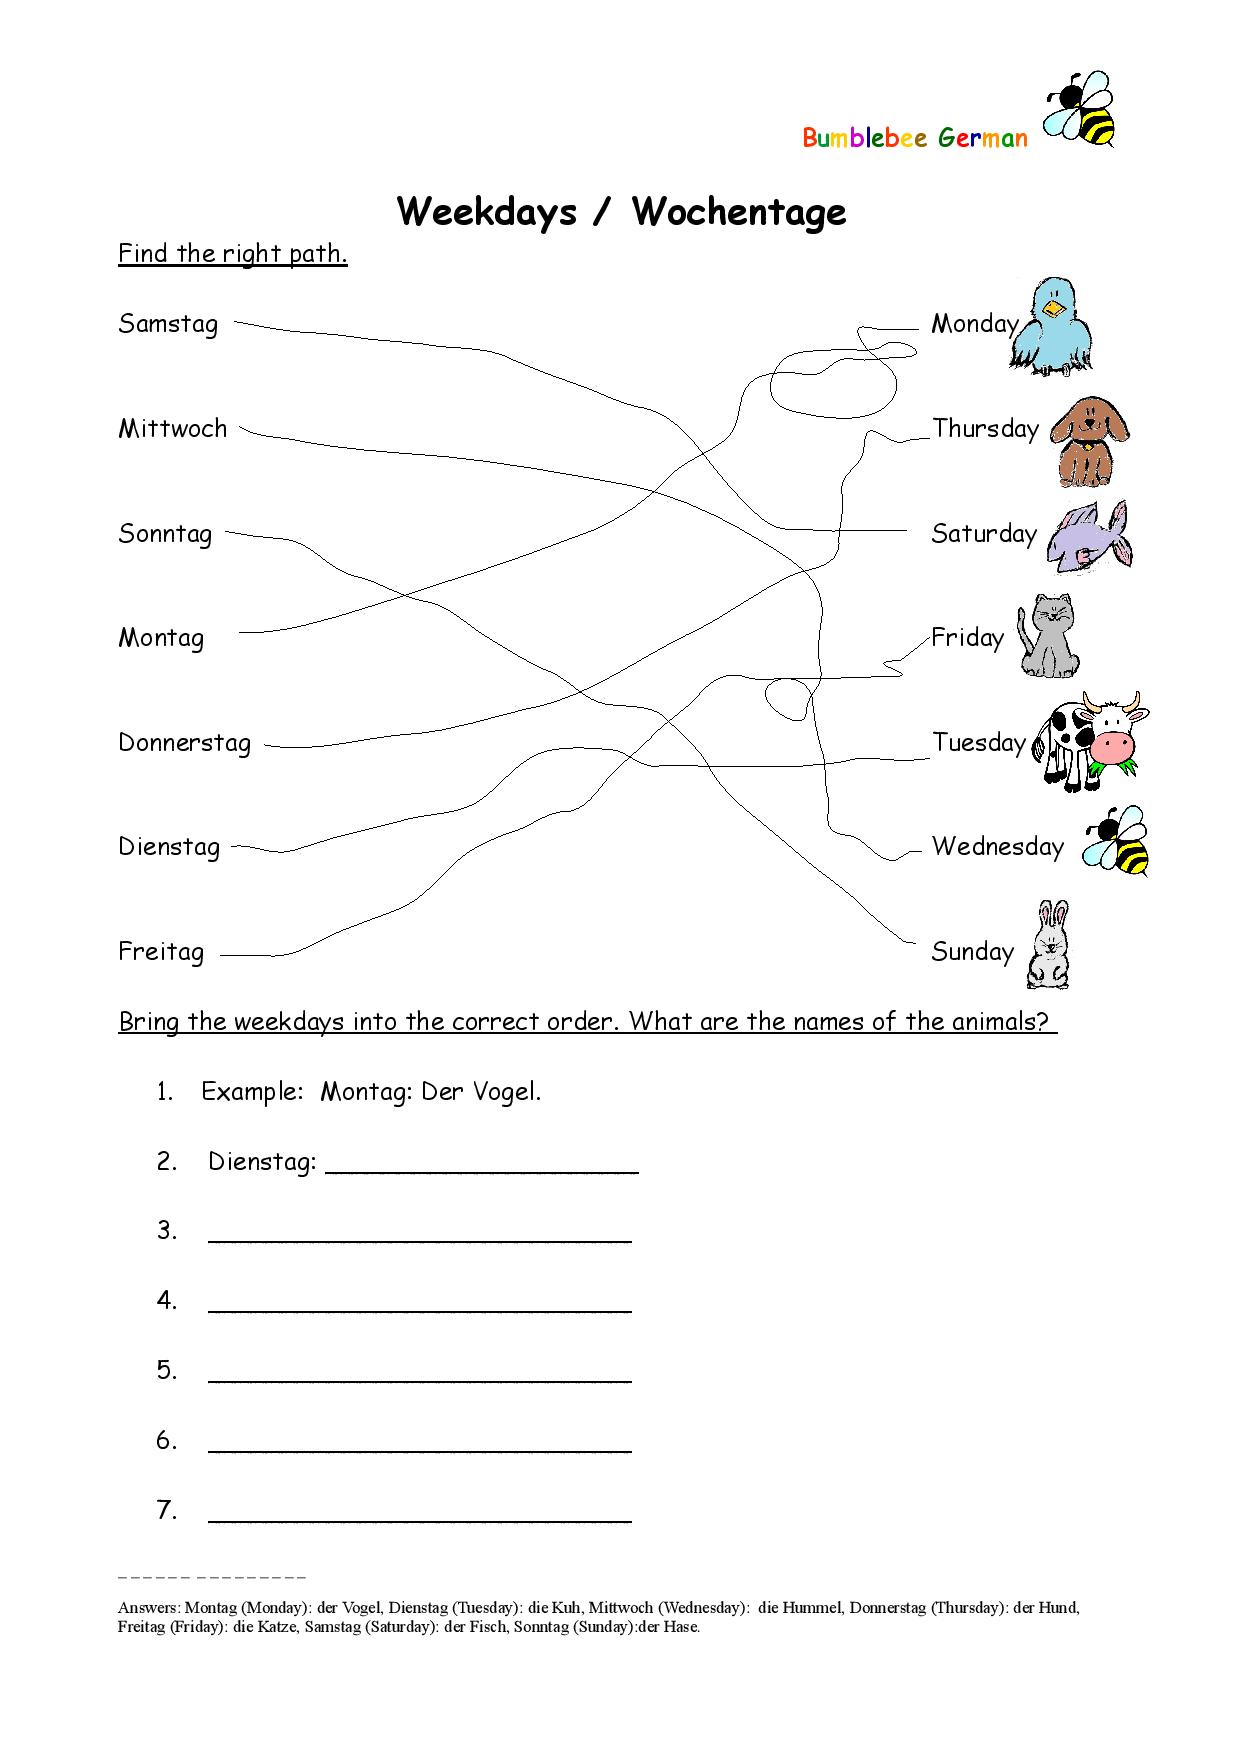 free-german-worksheets-for-beginners-learning-german-worksheets-german-language-learning